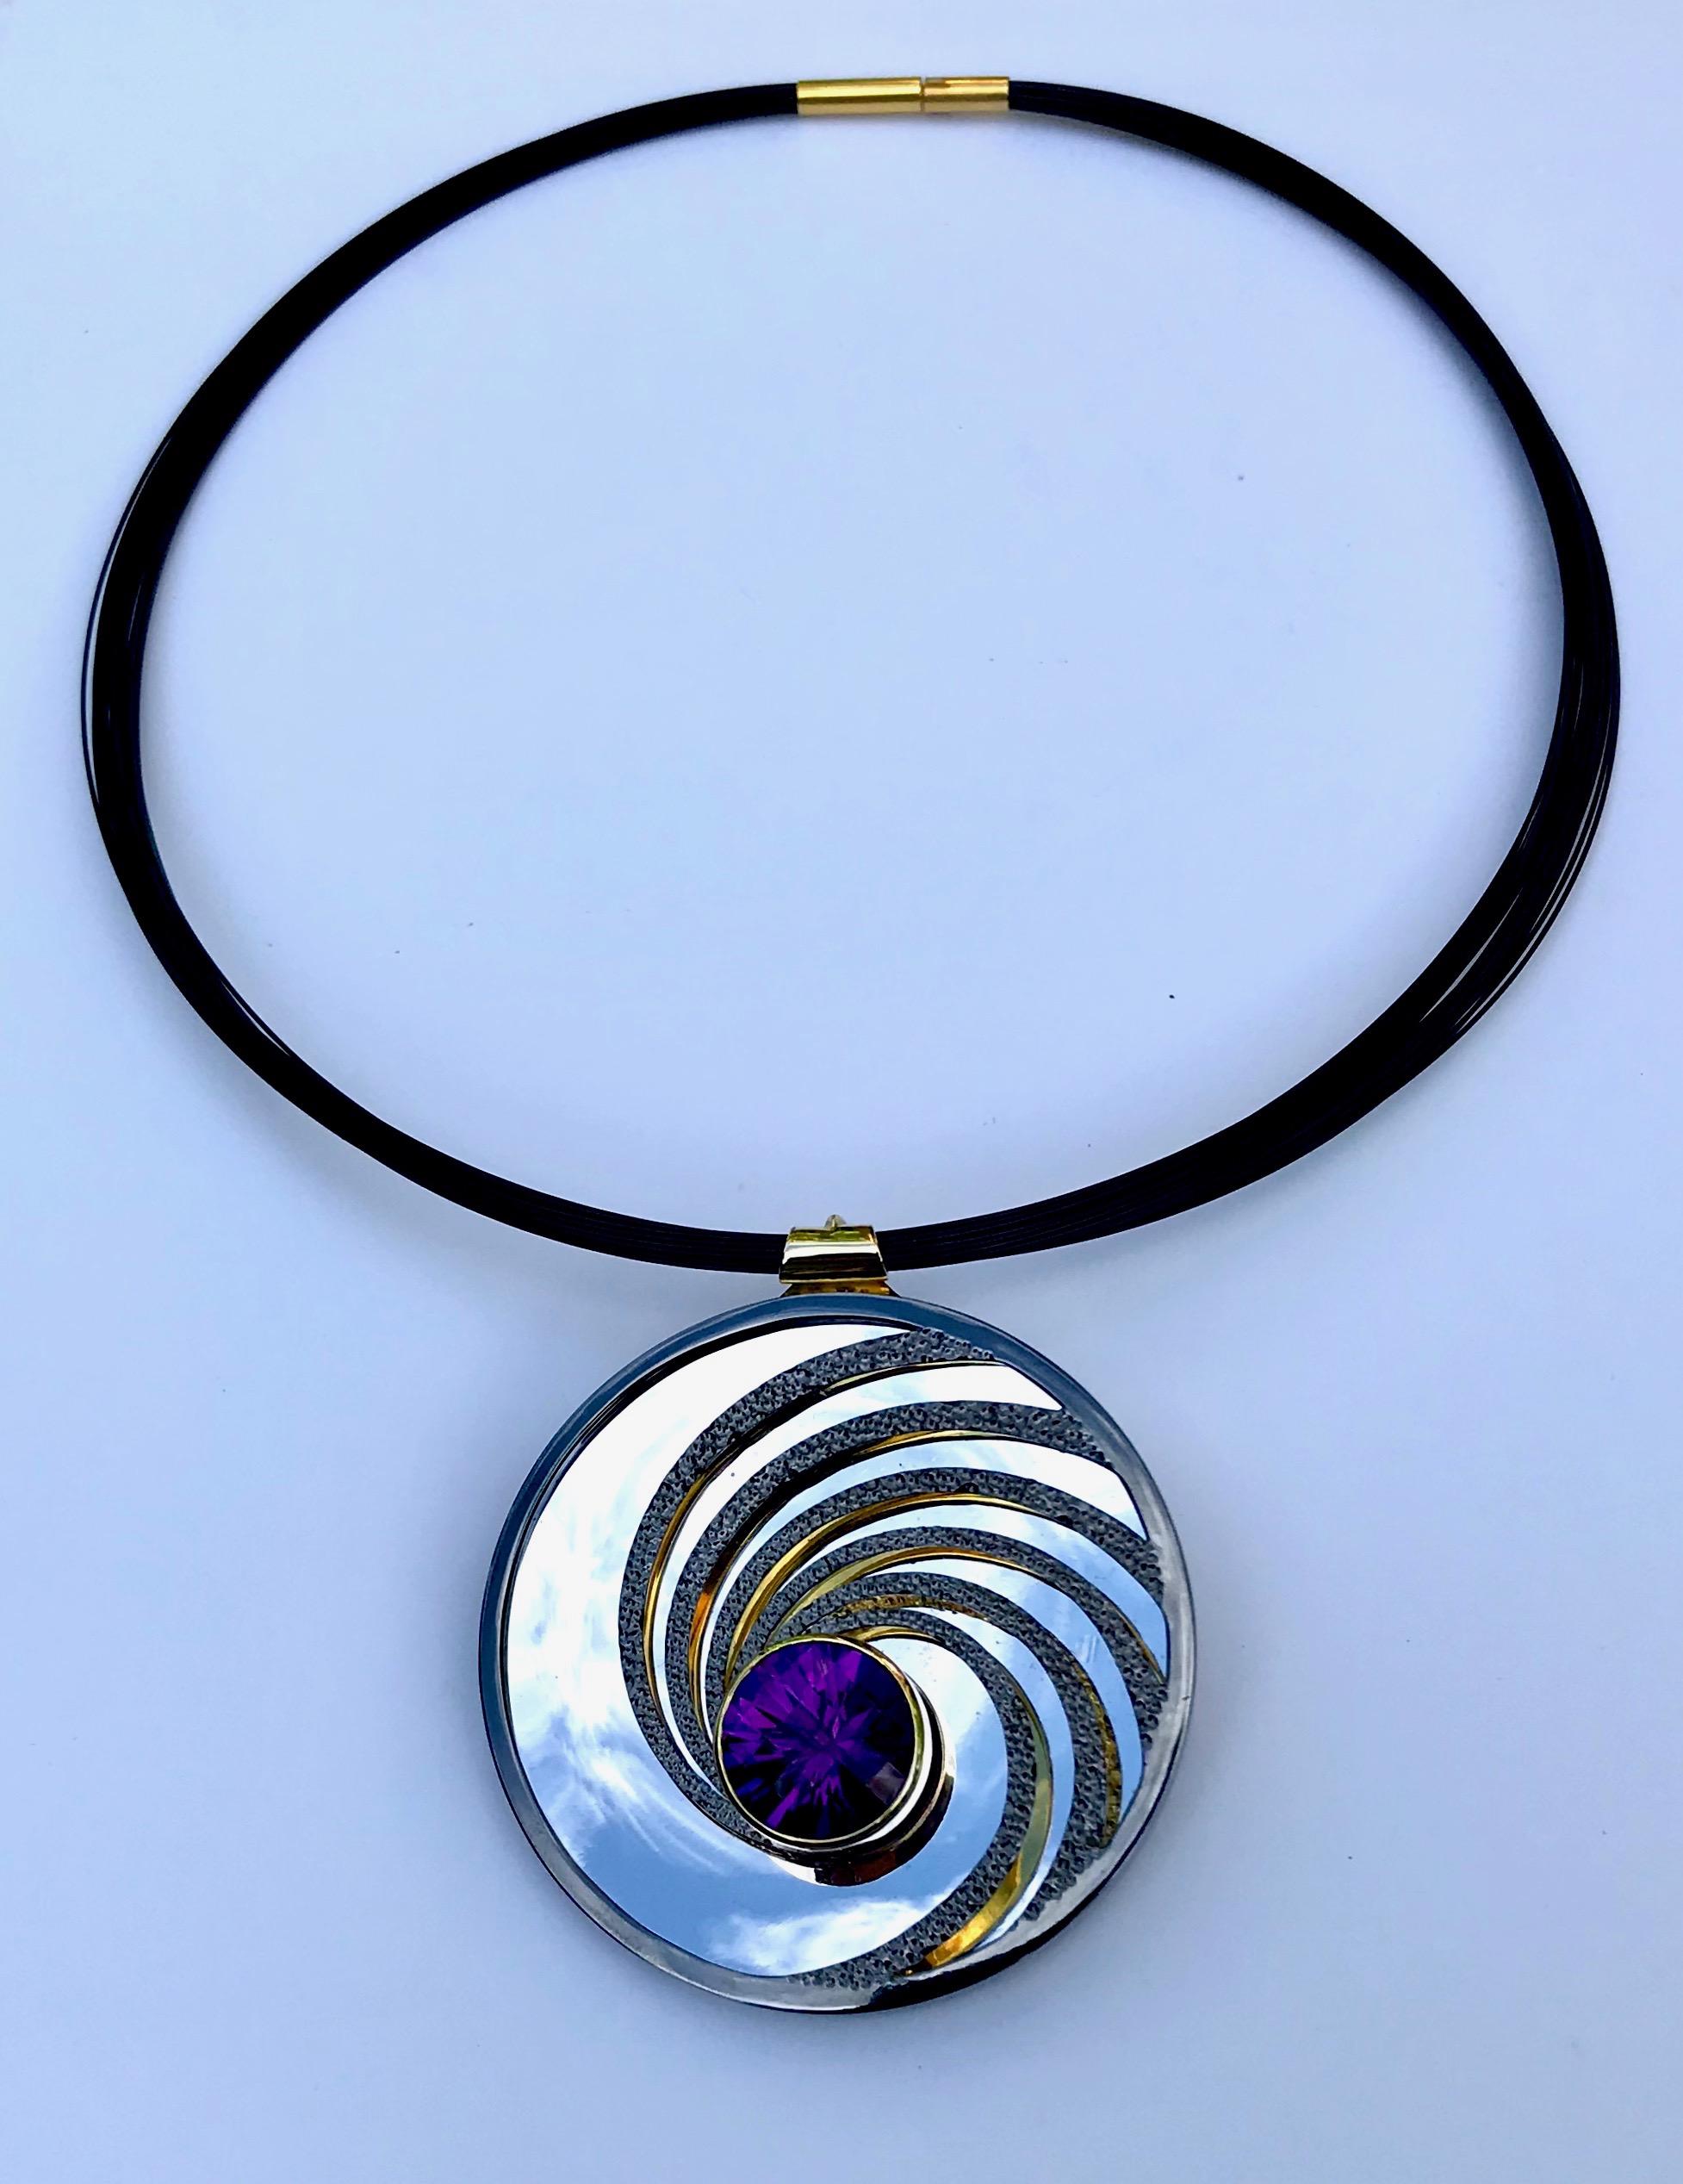 <a href="/node/296">Swinging on a Star. Dark Amethyst / Silver / Part Gilded part Rhodium Plate / the mirror on the inside back will reflect whatever its facing - here it’s the Sky.</a>